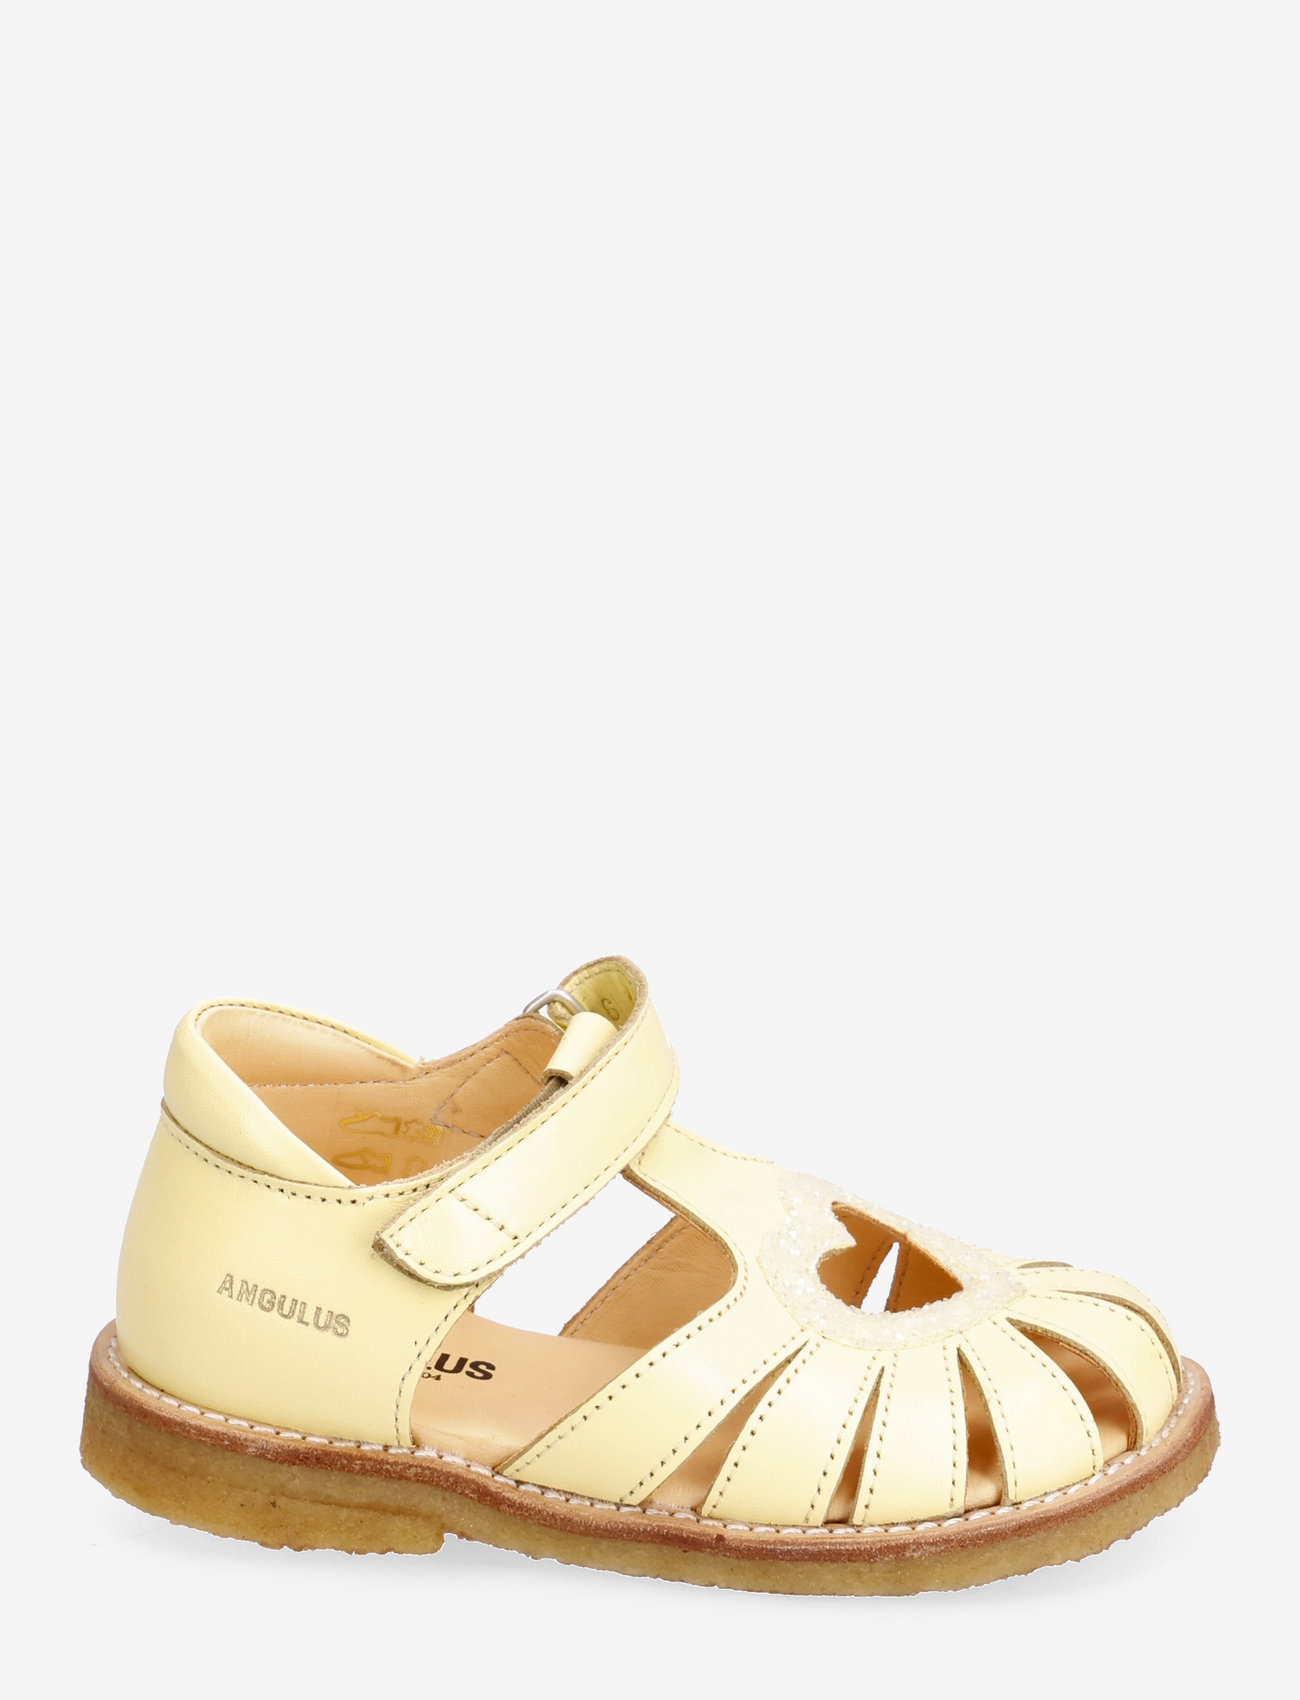 ANGULUS - Sandals - flat - closed toe - - gode sommertilbud - 1495/2696 ligth yellow/ligth y - 1